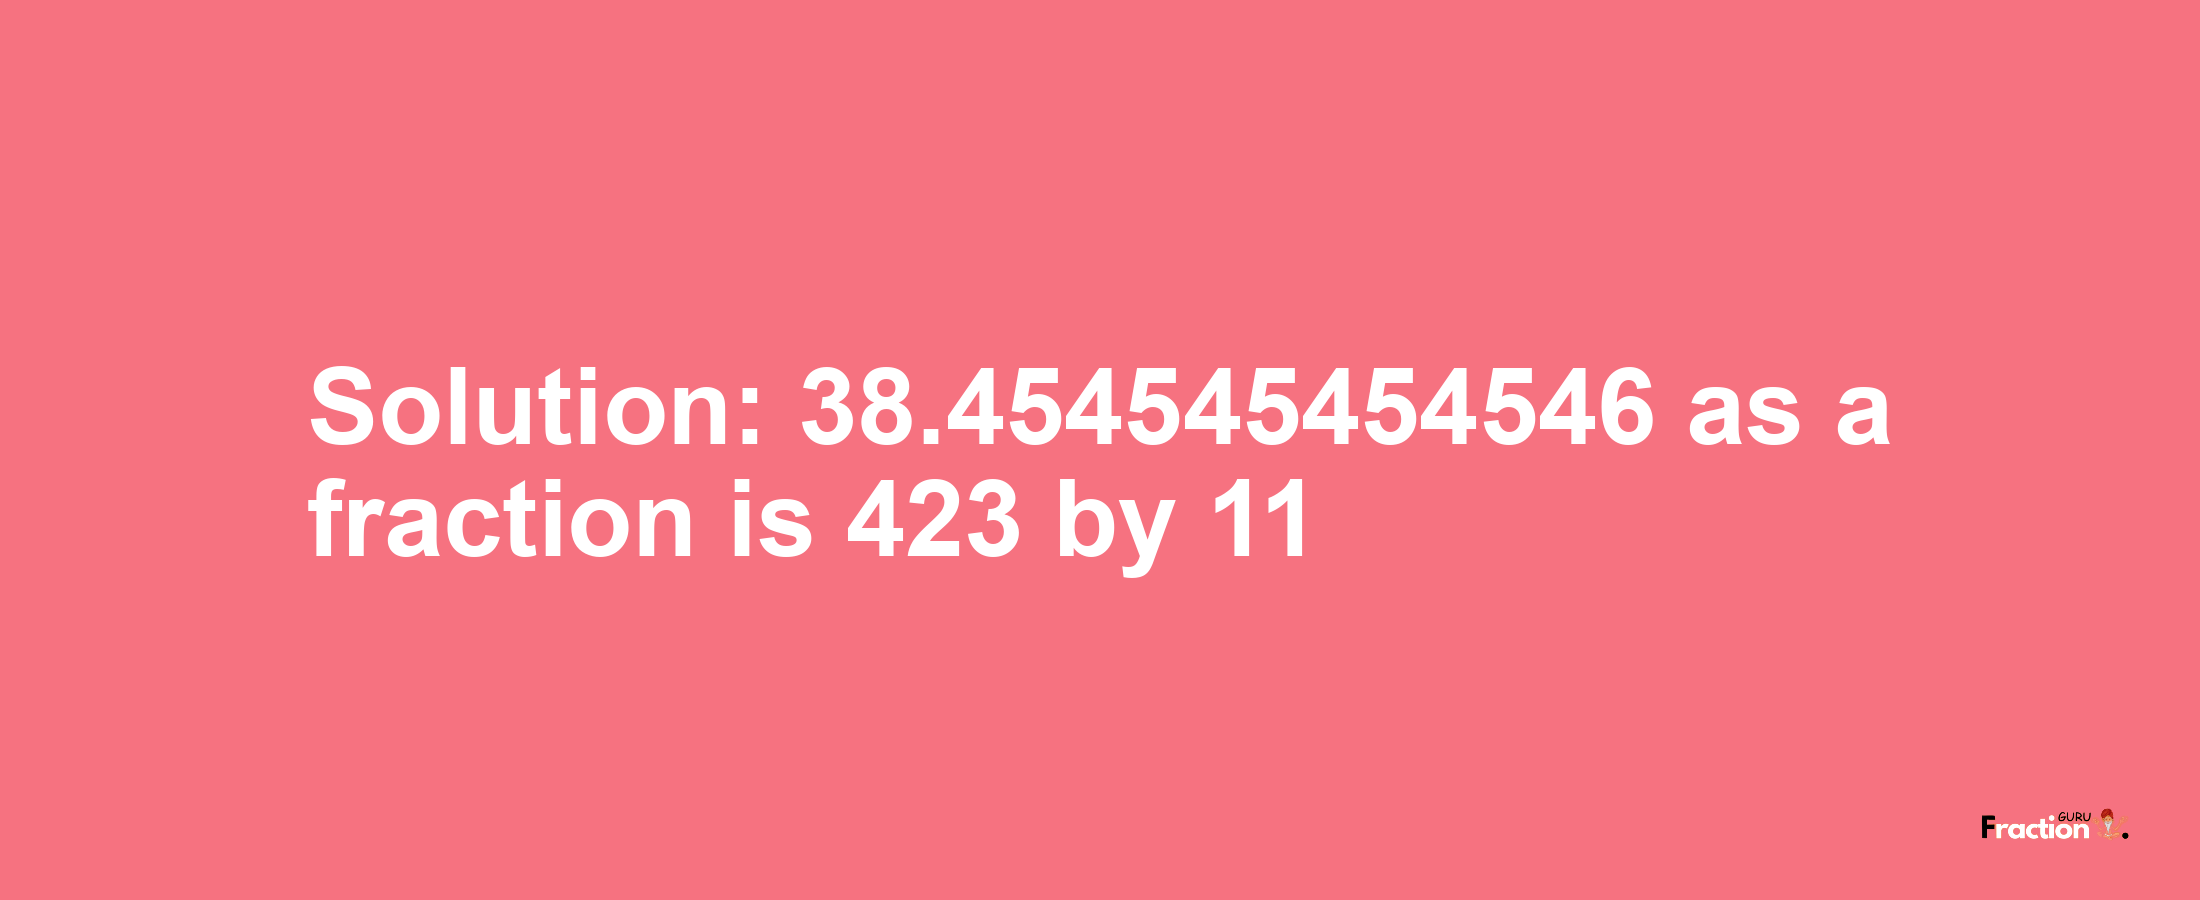 Solution:38.454545454546 as a fraction is 423/11